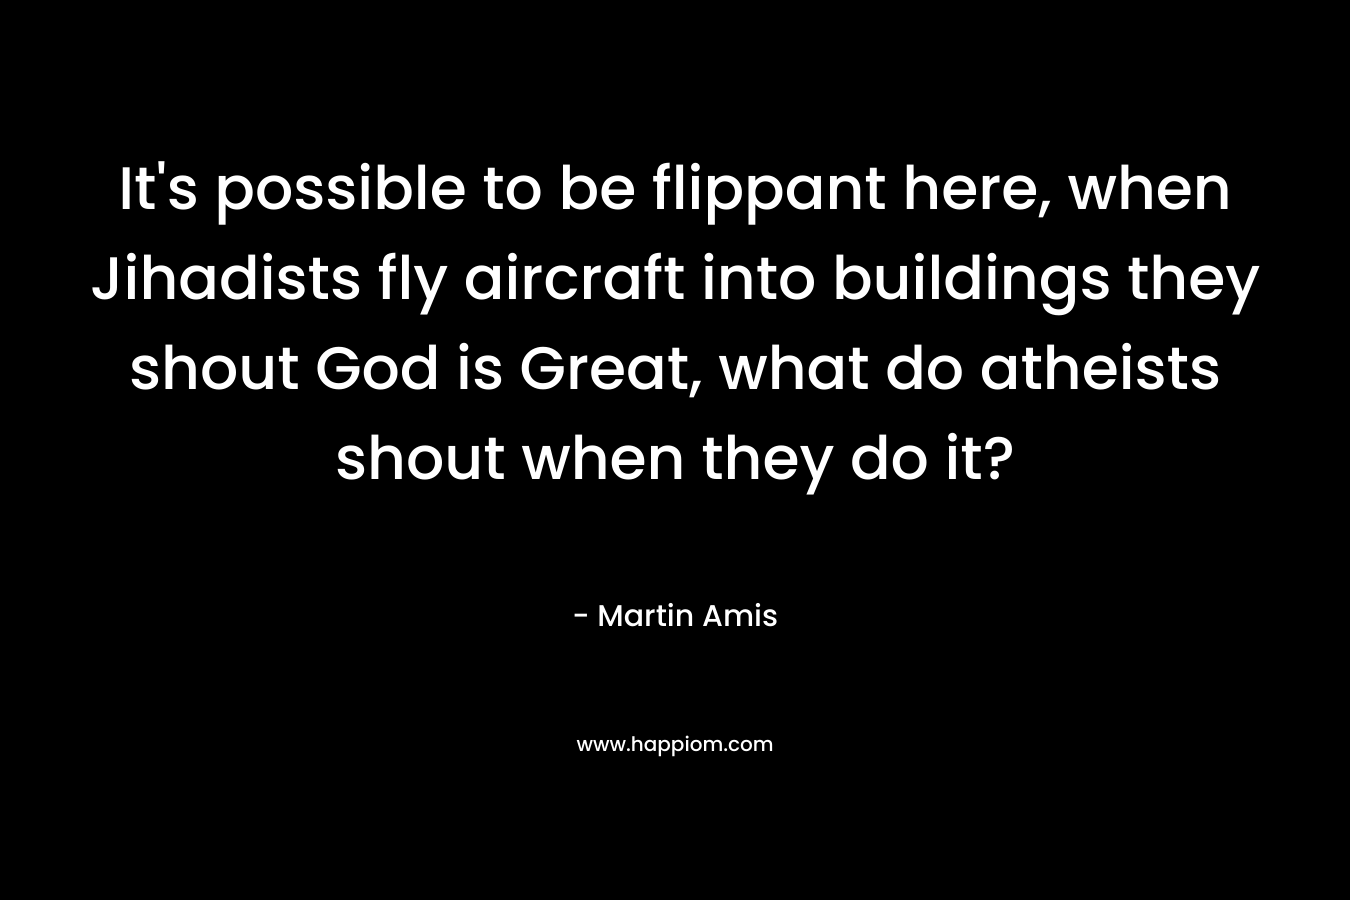 It's possible to be flippant here, when Jihadists fly aircraft into buildings they shout God is Great, what do atheists shout when they do it?